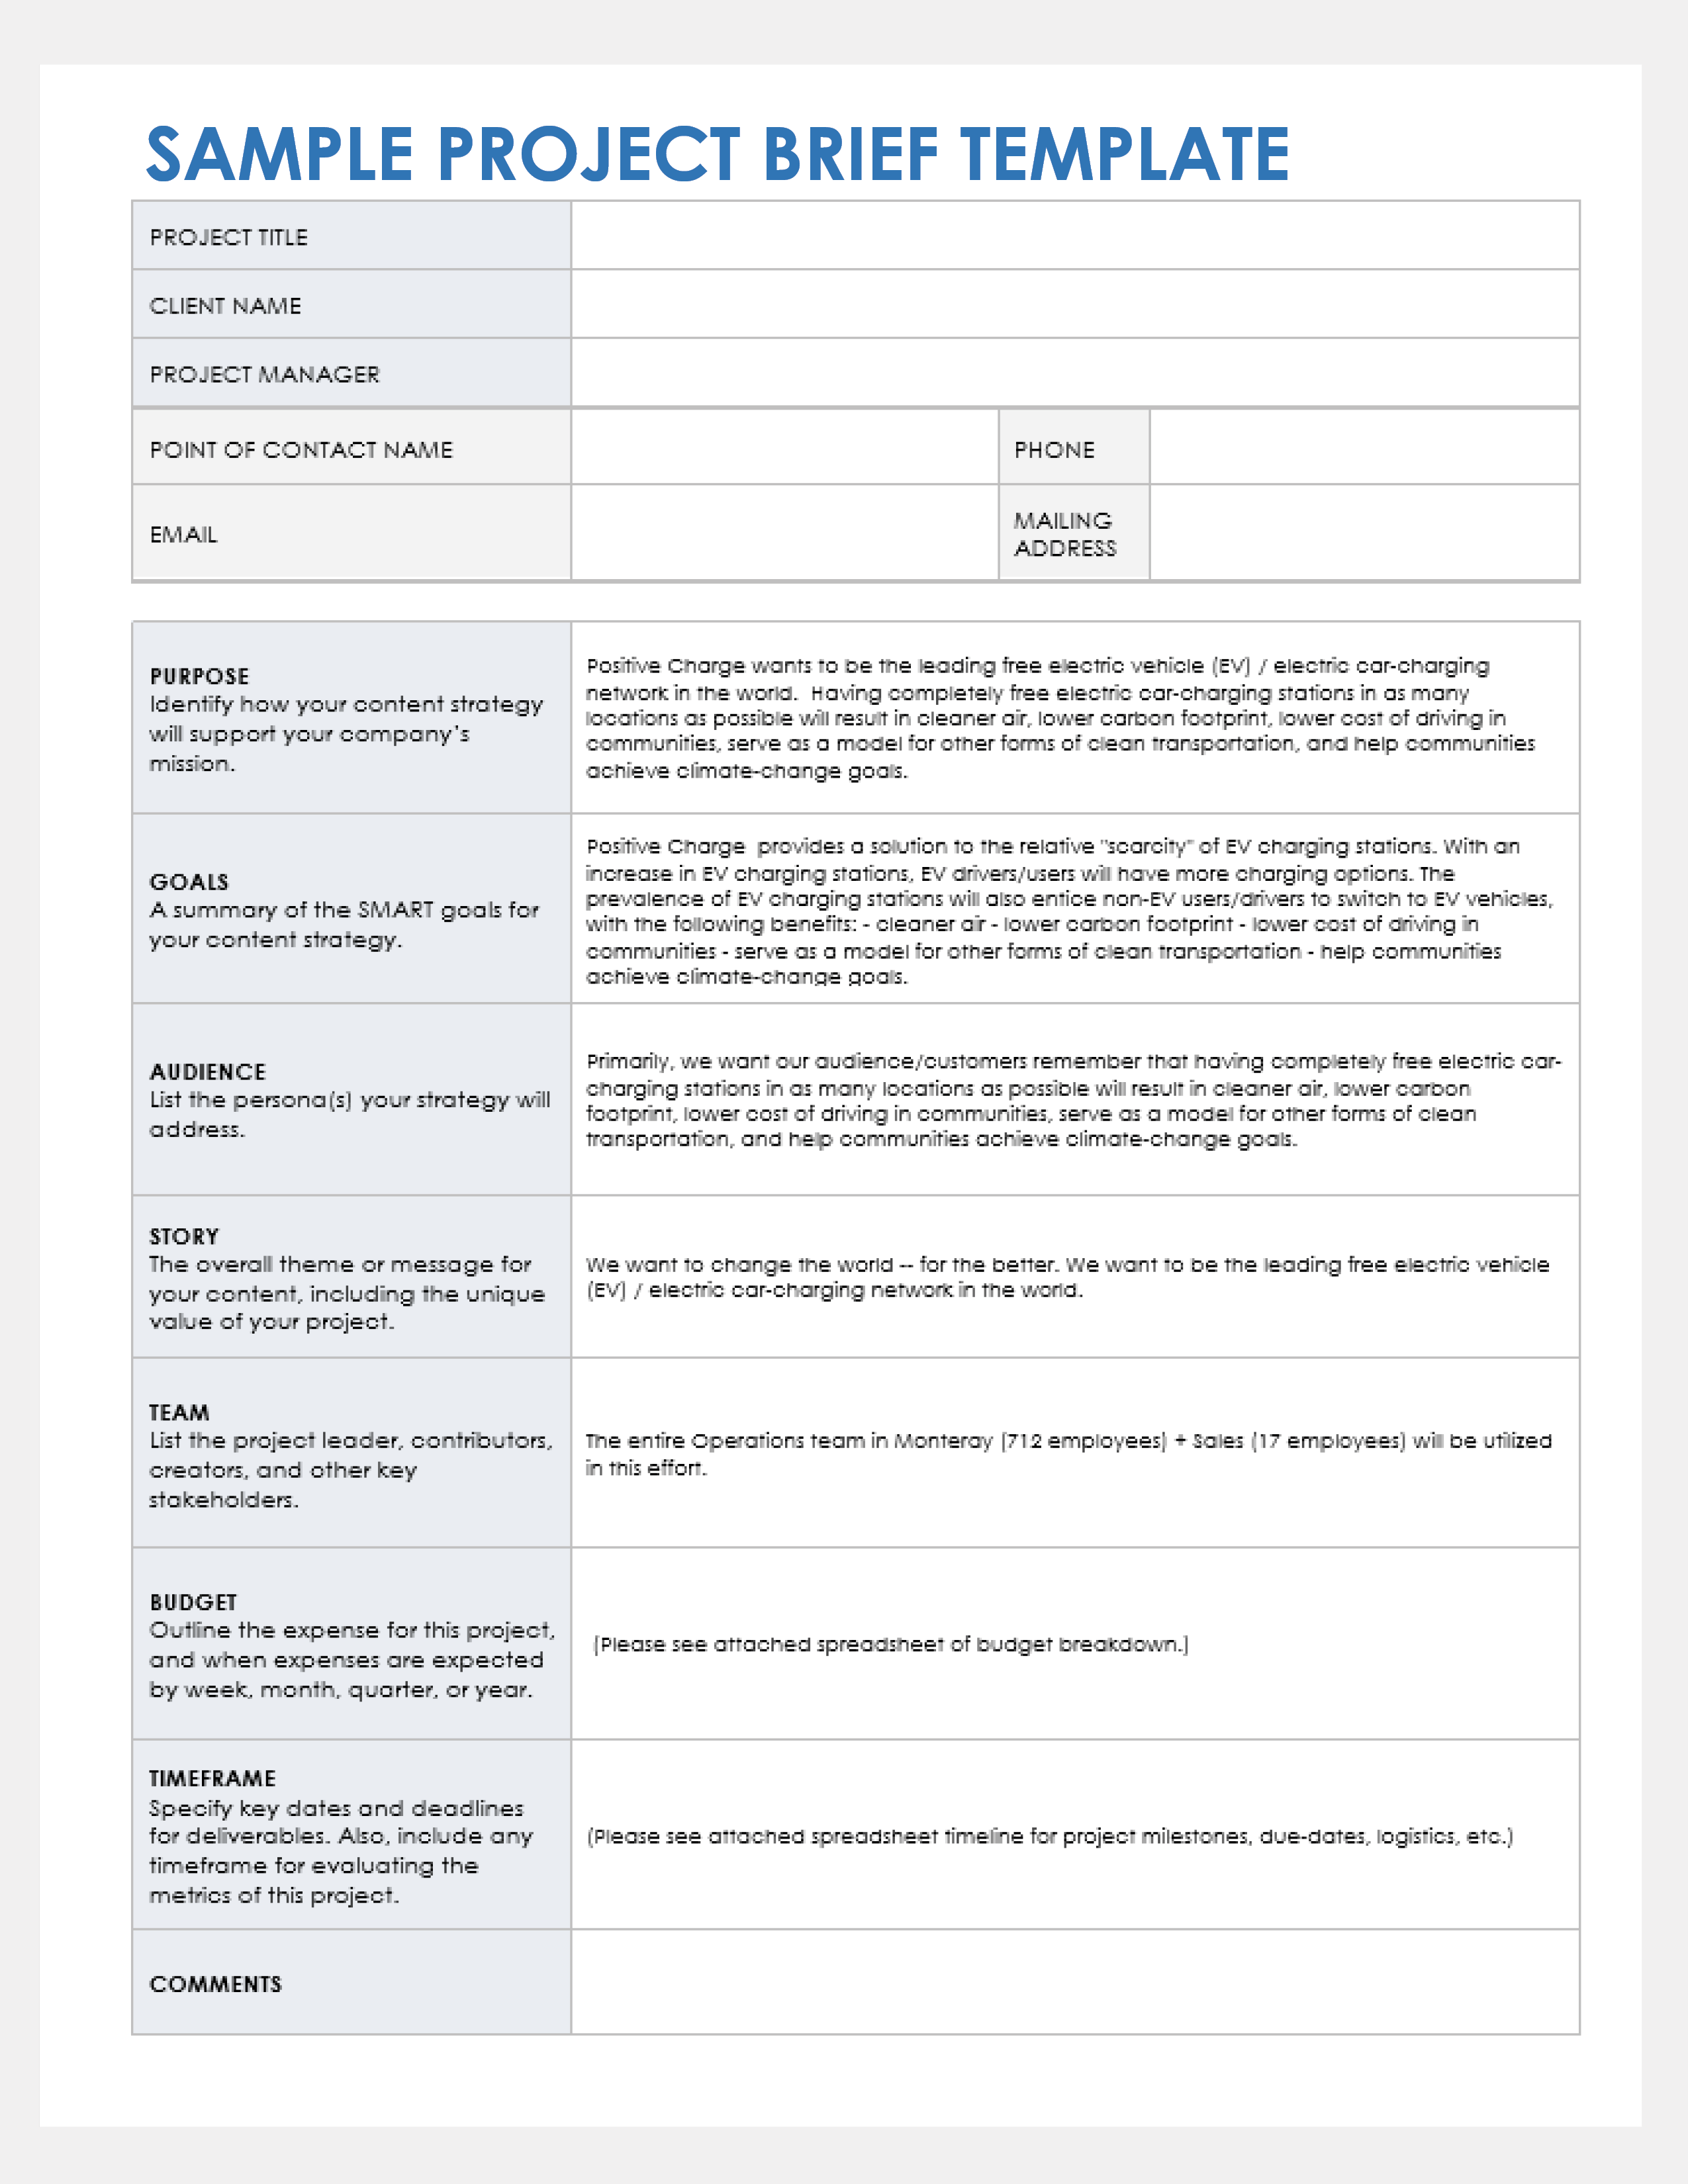 Project Brief Sample Template